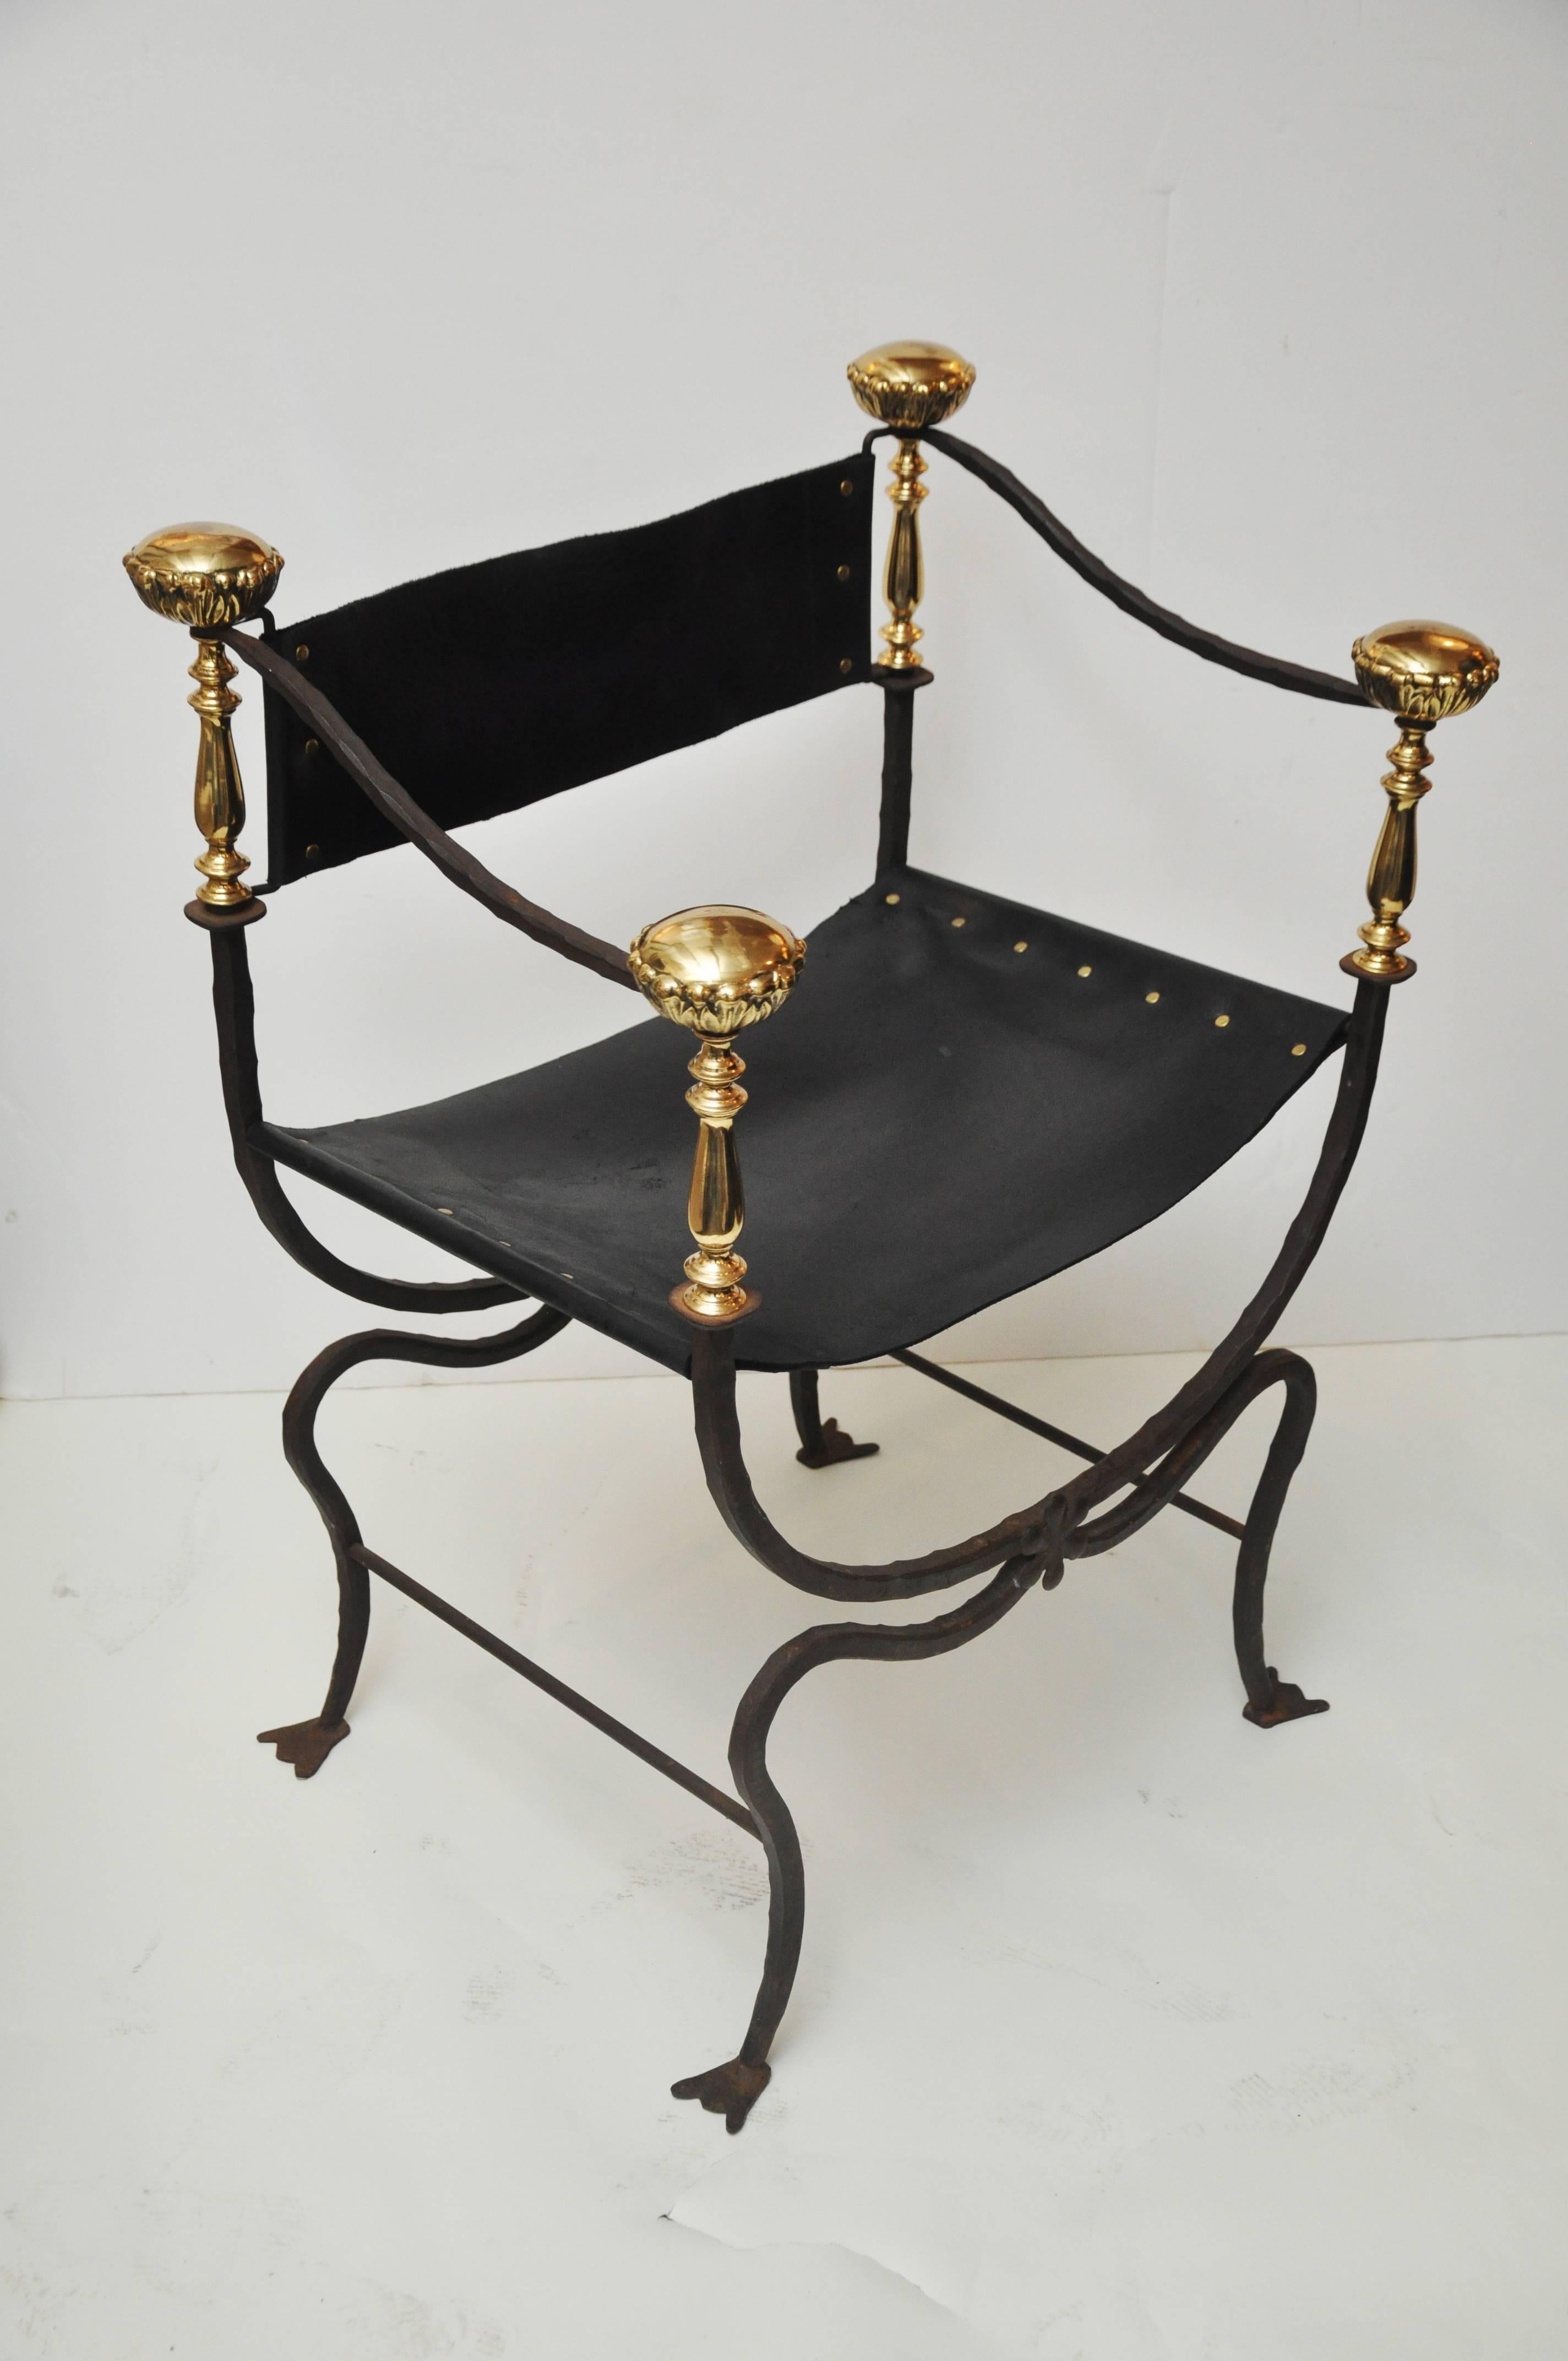 Savonarola chair with iron and brass details. Chair has beautiful curved design and unique foot design.